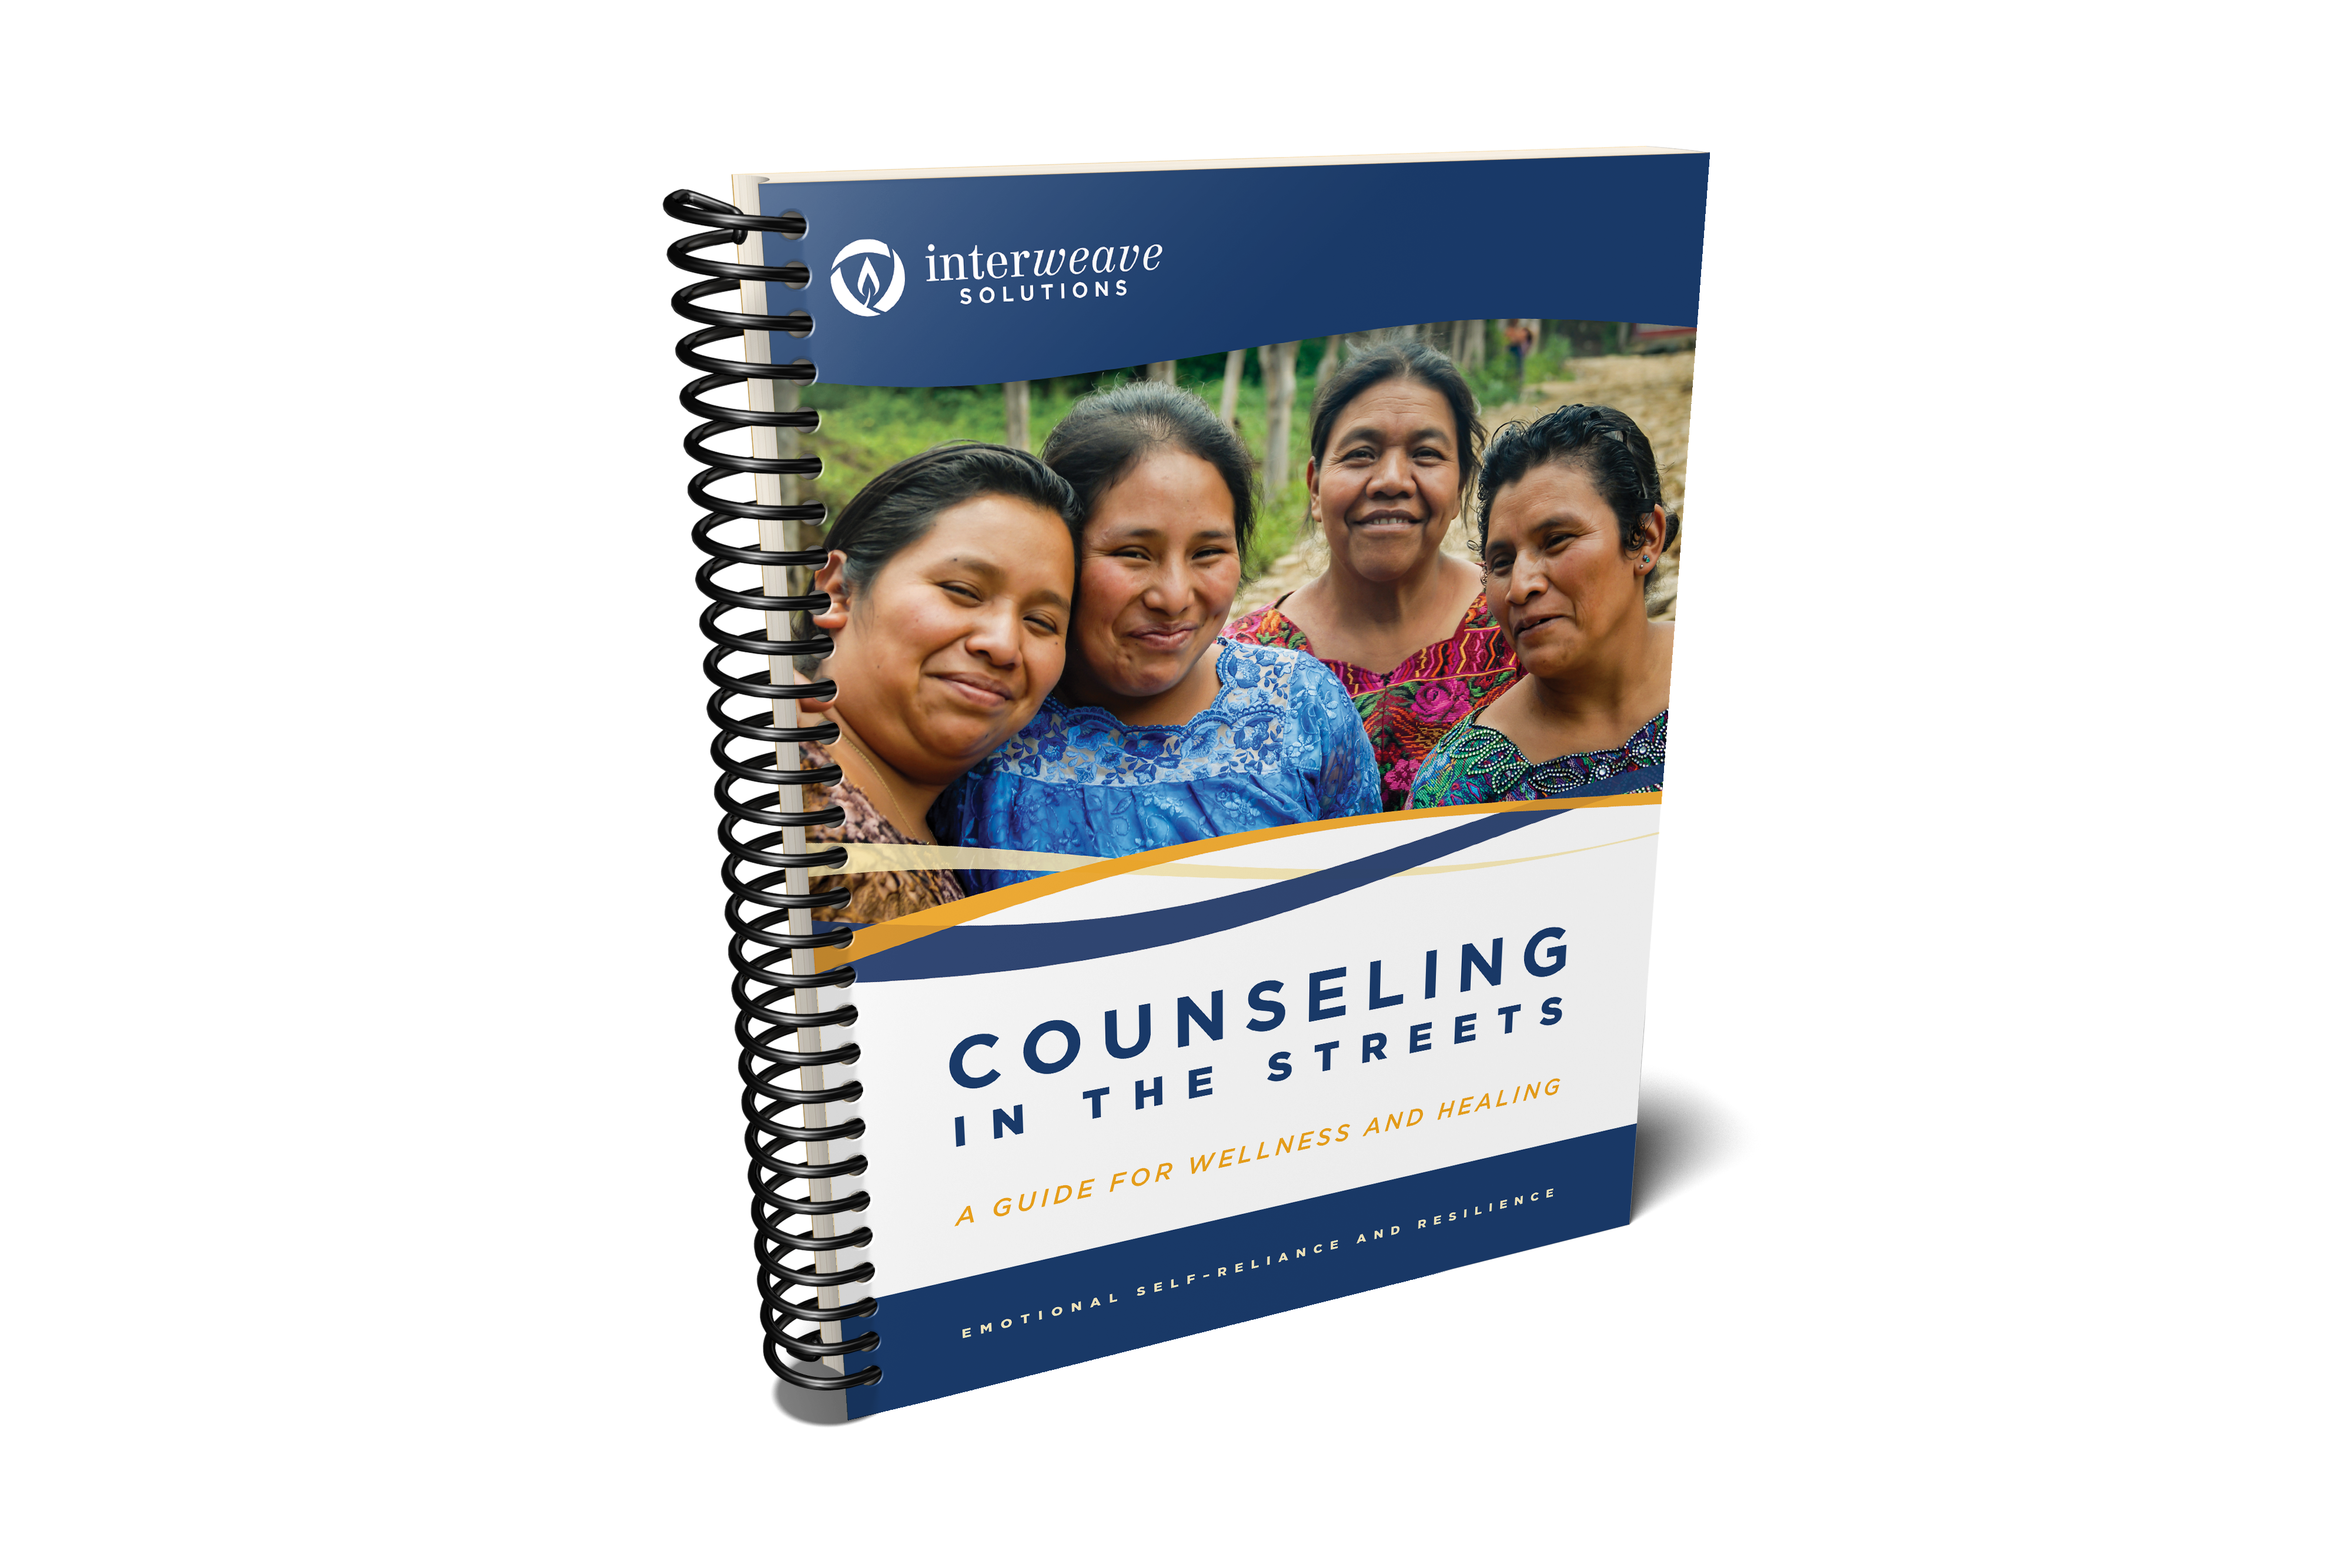 To download Counseling in the Streets, please click here.